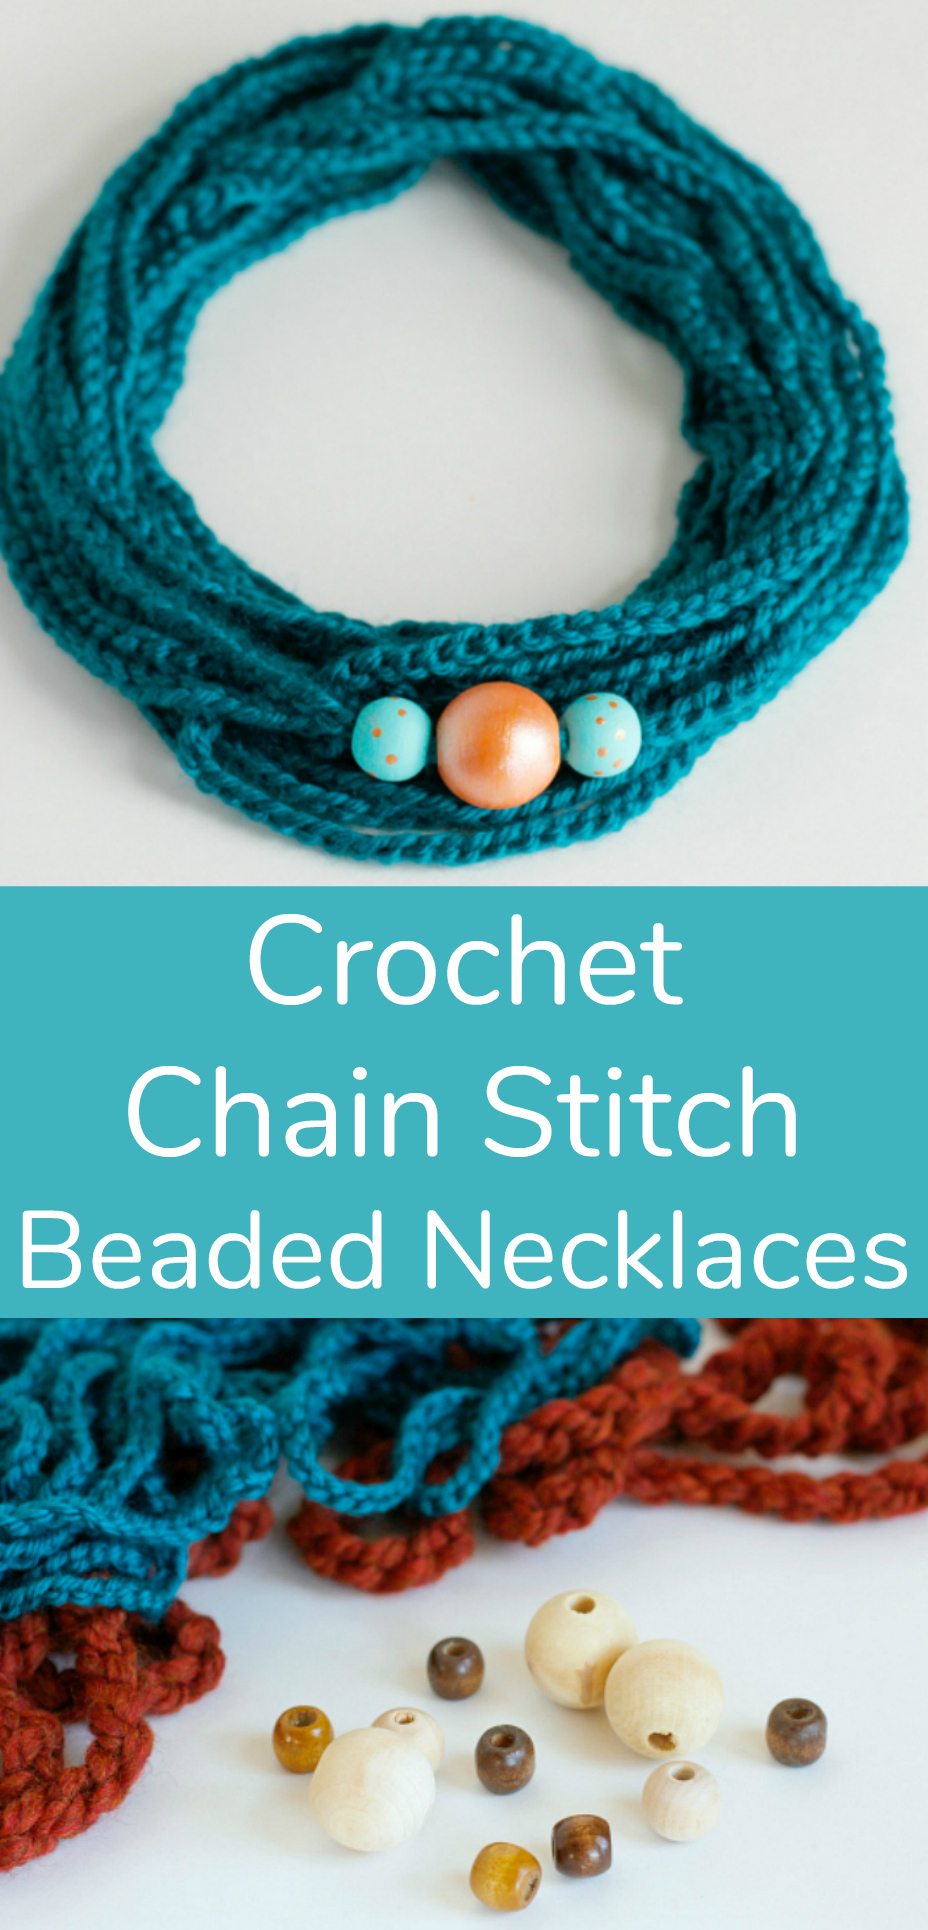 DIY Crochet Chain Stitch Beaded Necklaces